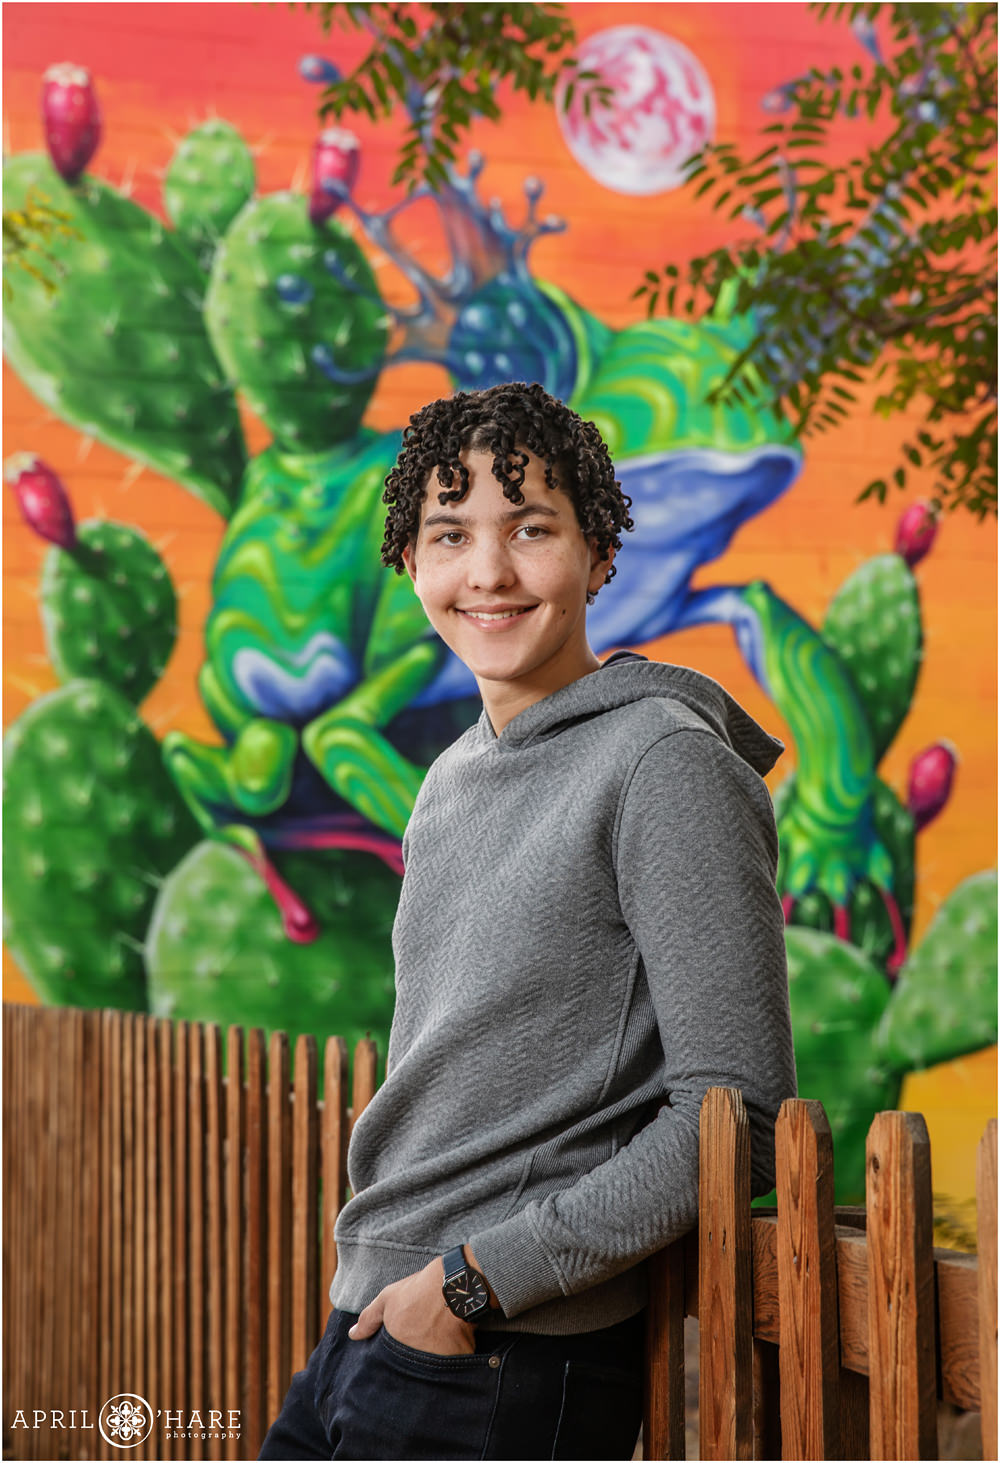 High school senior boy wearing a gray sweater, jeans, and a watch poses in front of a brightly colored frog and cactus mural in Five Points Denver CO